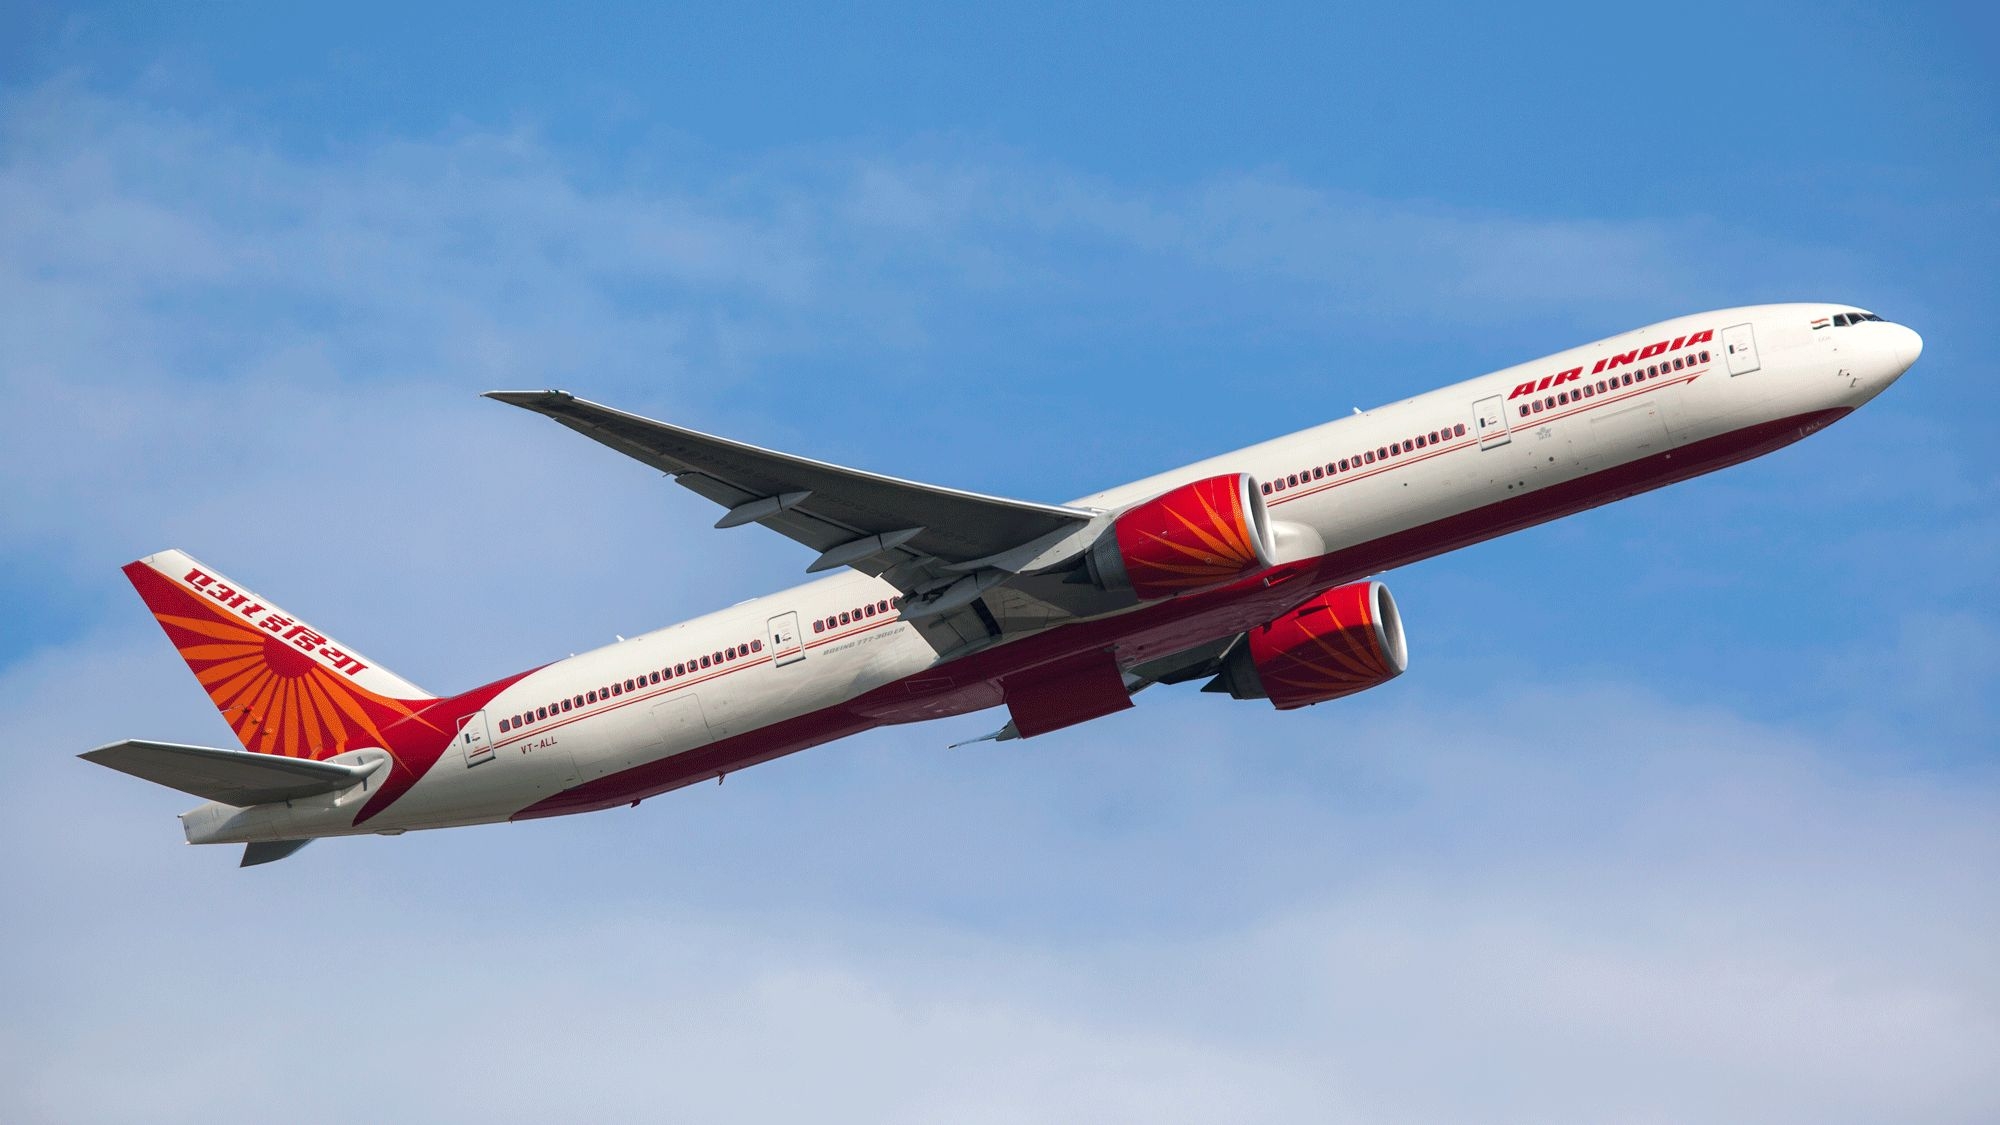 Air India Fell Short Of Addressing The Urinating Case, Says Tata Sons Chairman